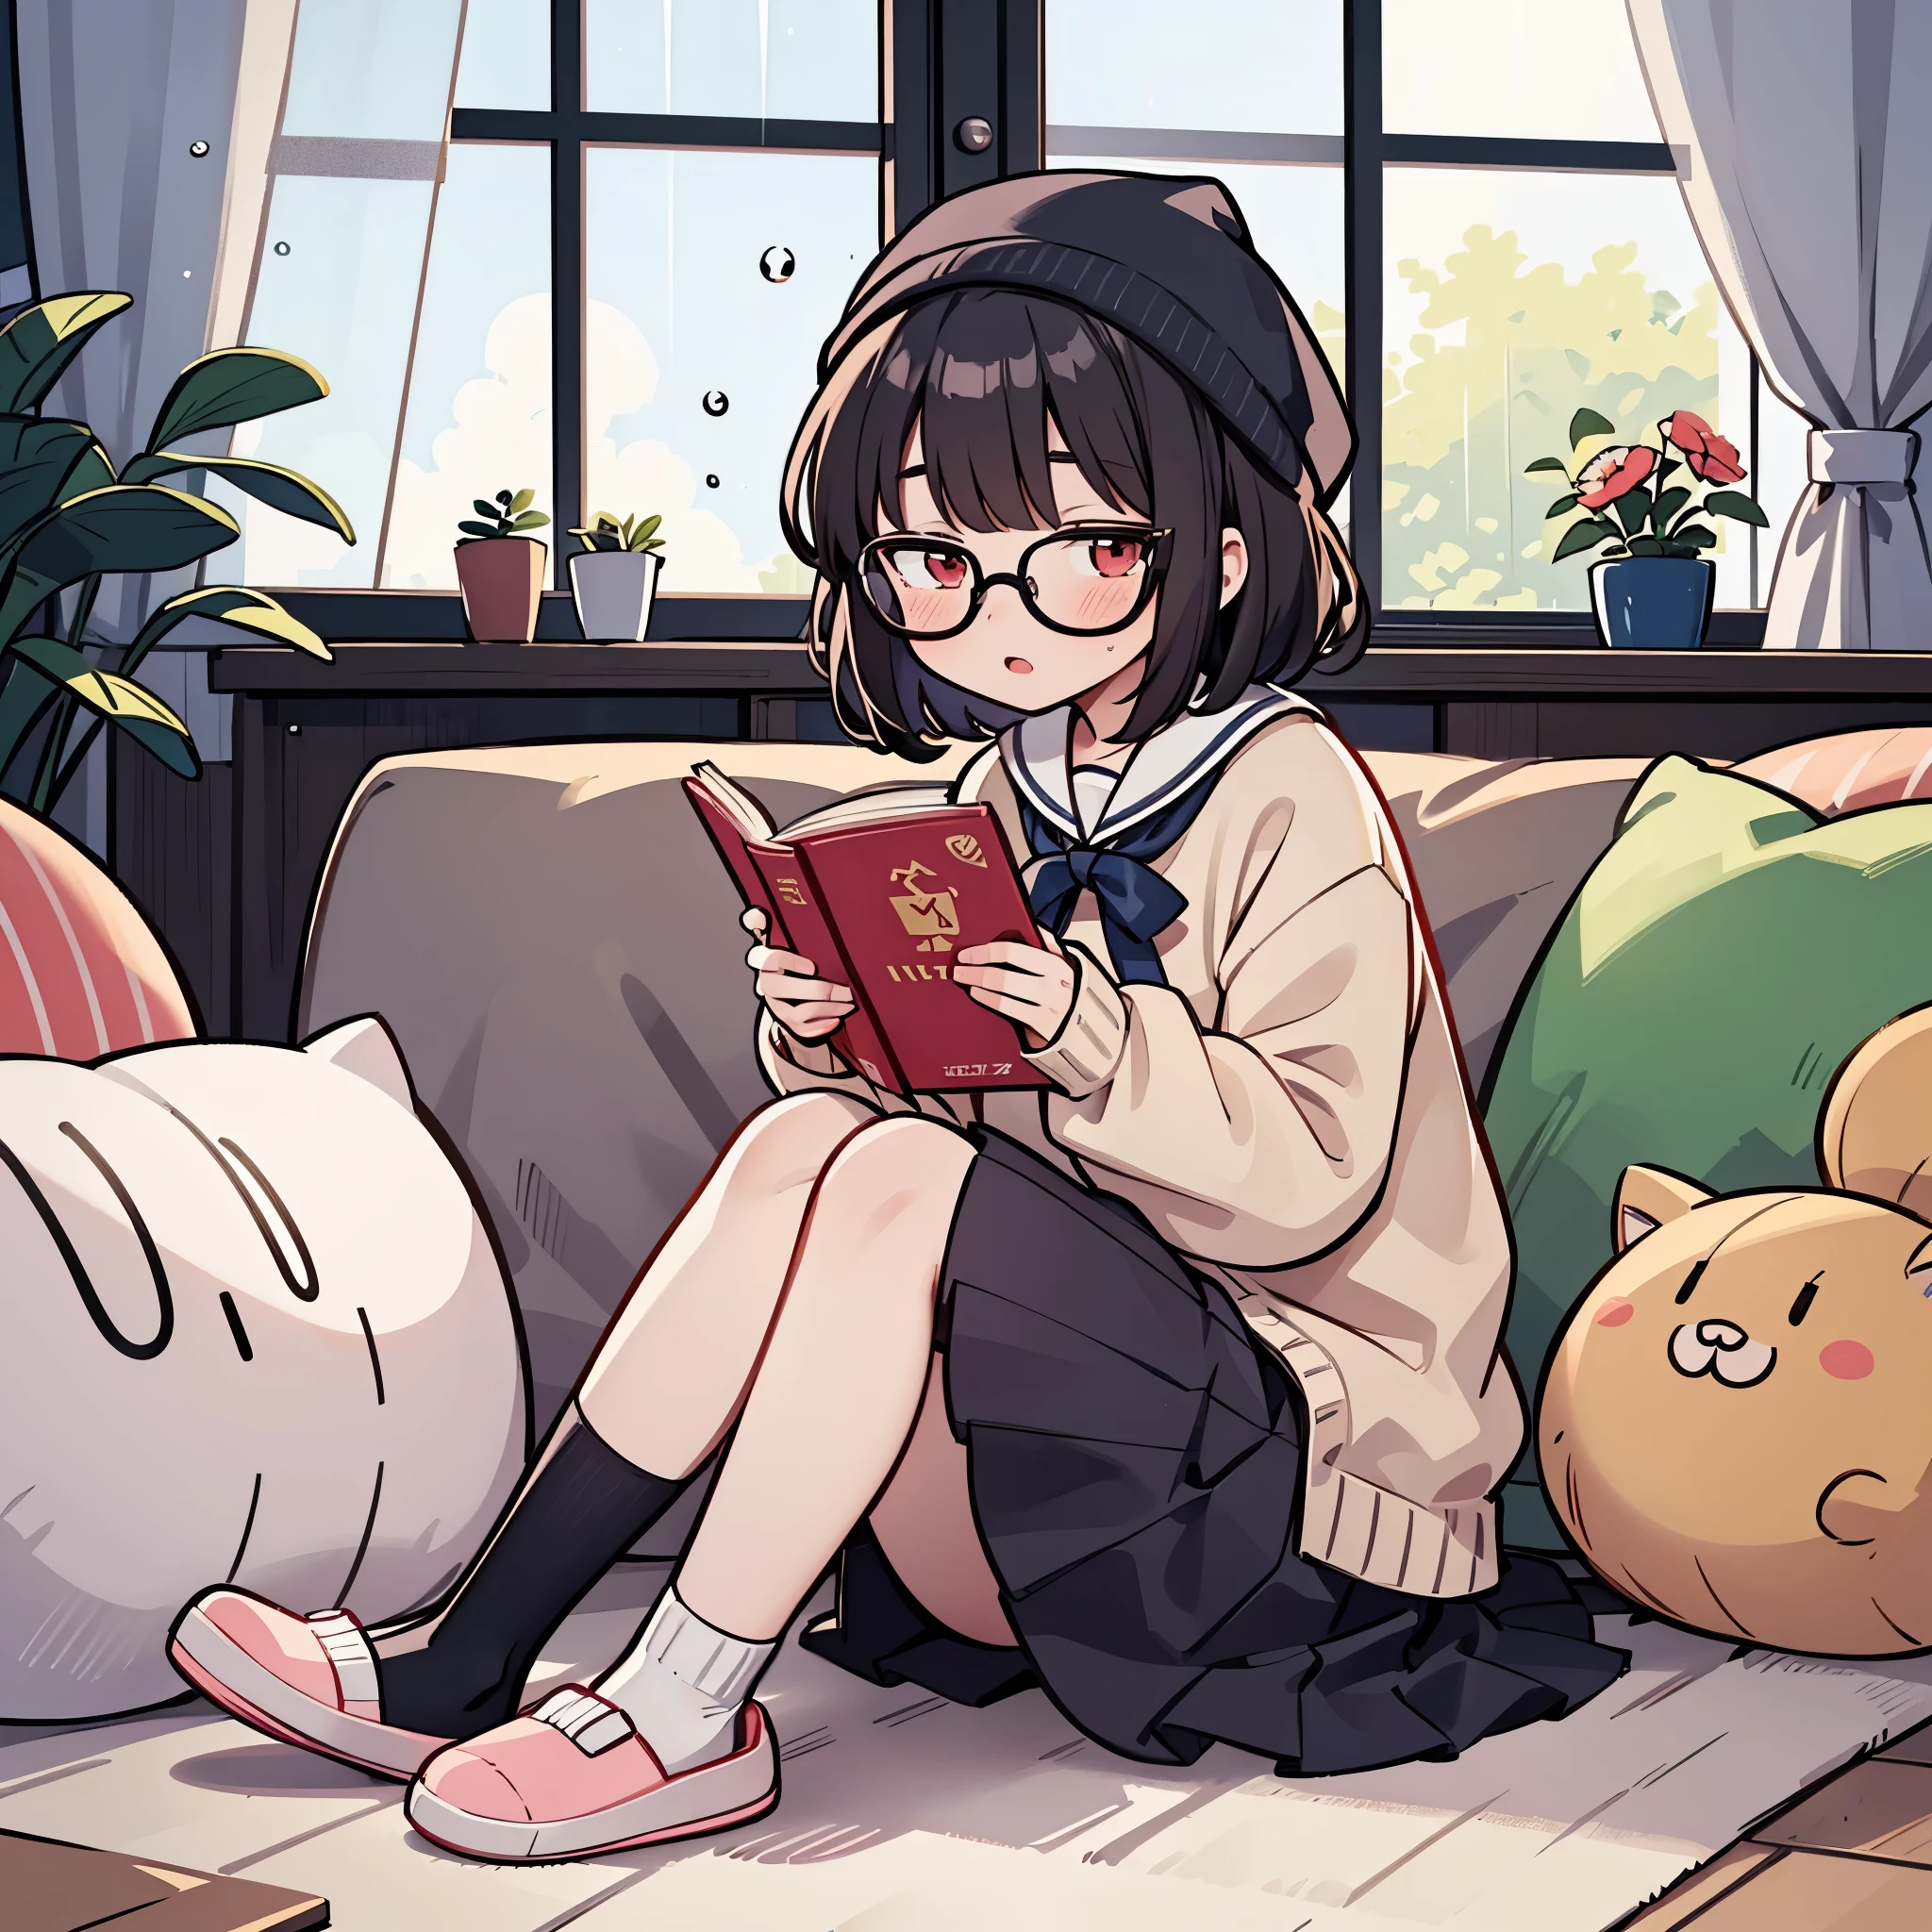 1 girl, solo, black hair, fluffy cut hair, cute , red eyes, looking at viewer, sitting on a couch, raining outside, window, raining scenery window, holding book, black school sweater clothes, black beanie, short skirt, socks, (cute slippers), Round Glasses Black cozy, room, pastel colors